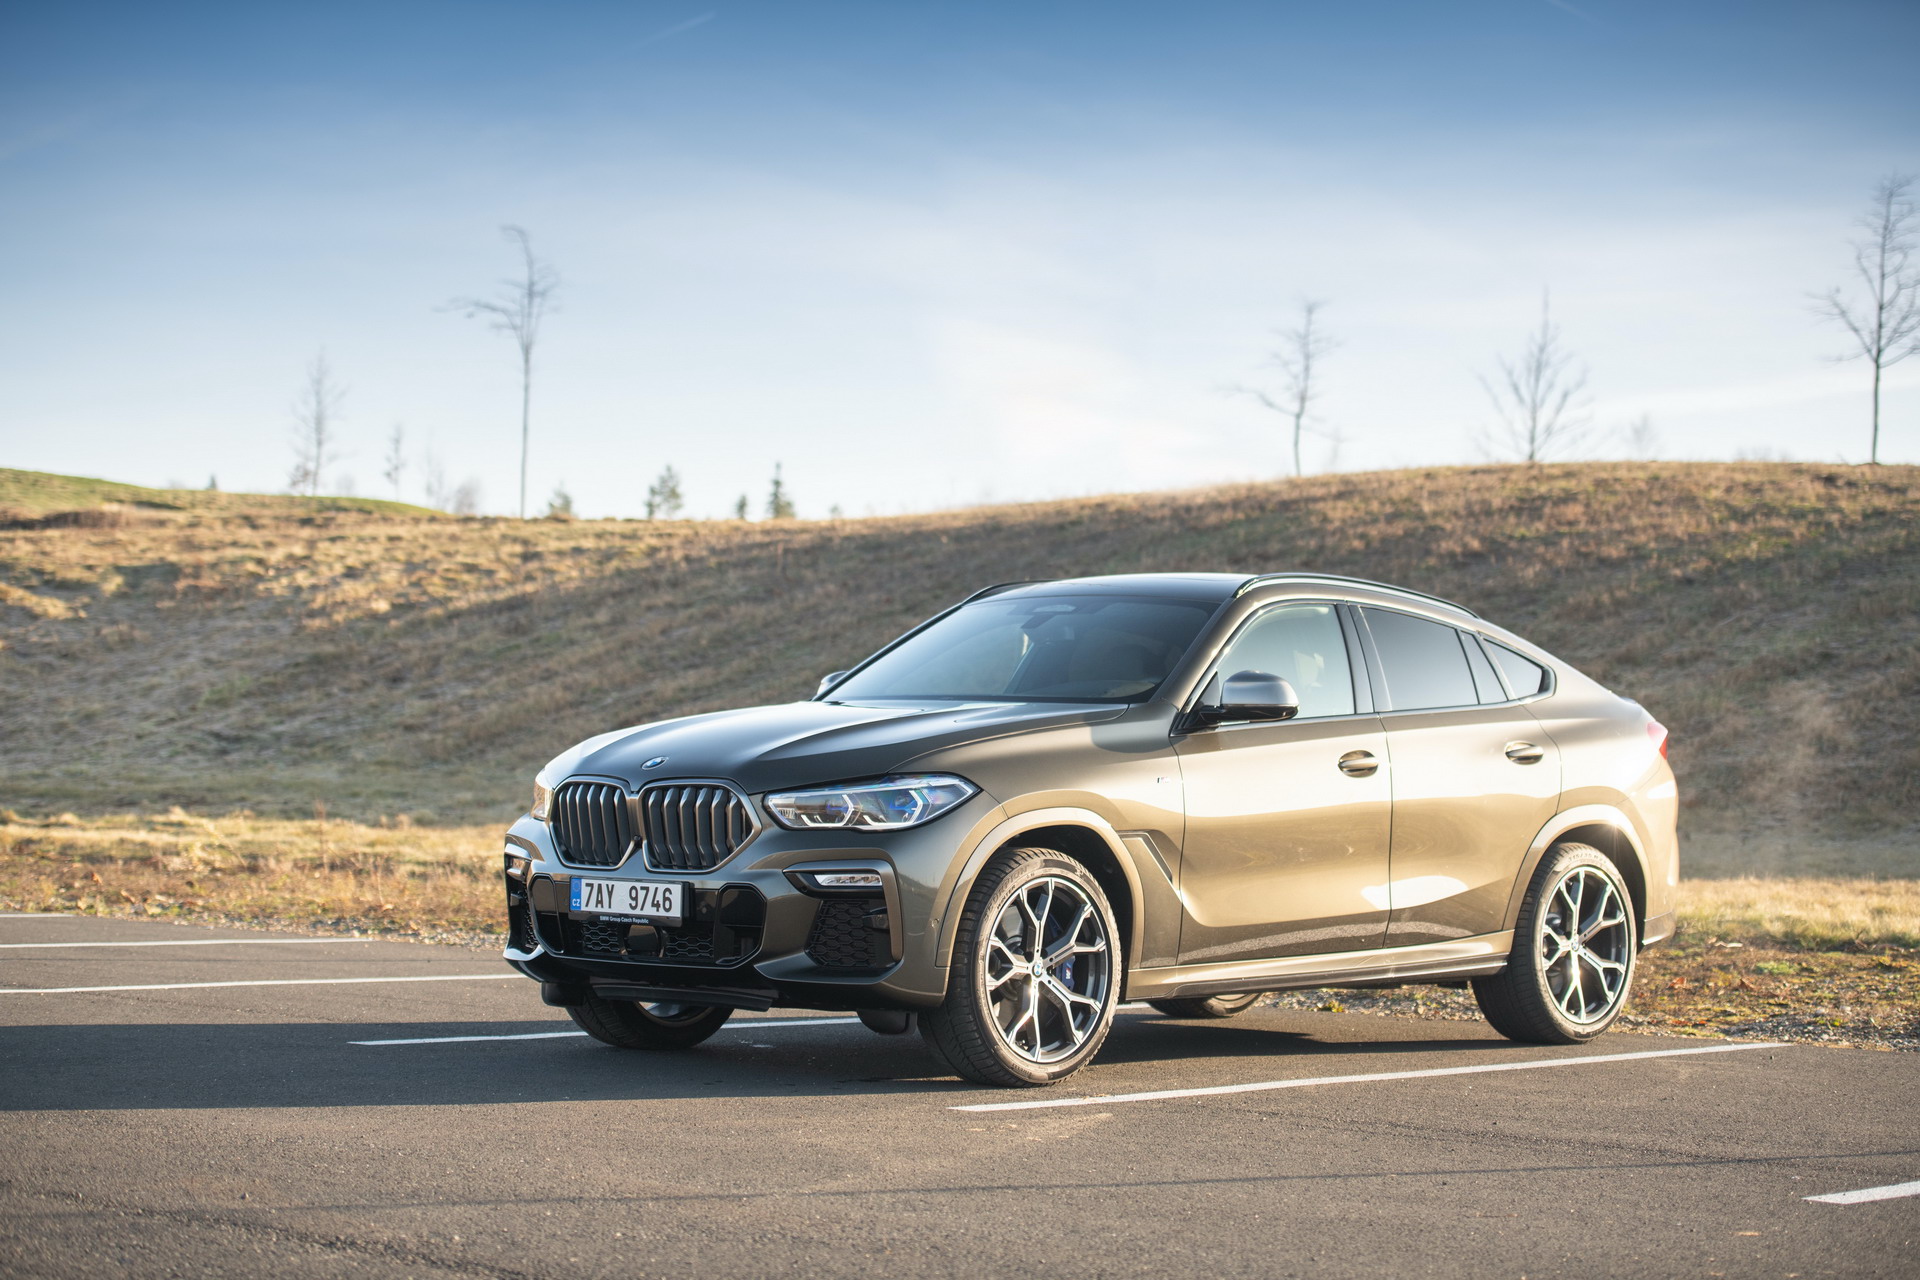 PHOTOS: Media launch of the new BMW X6 M50i in Czech Republic – Best